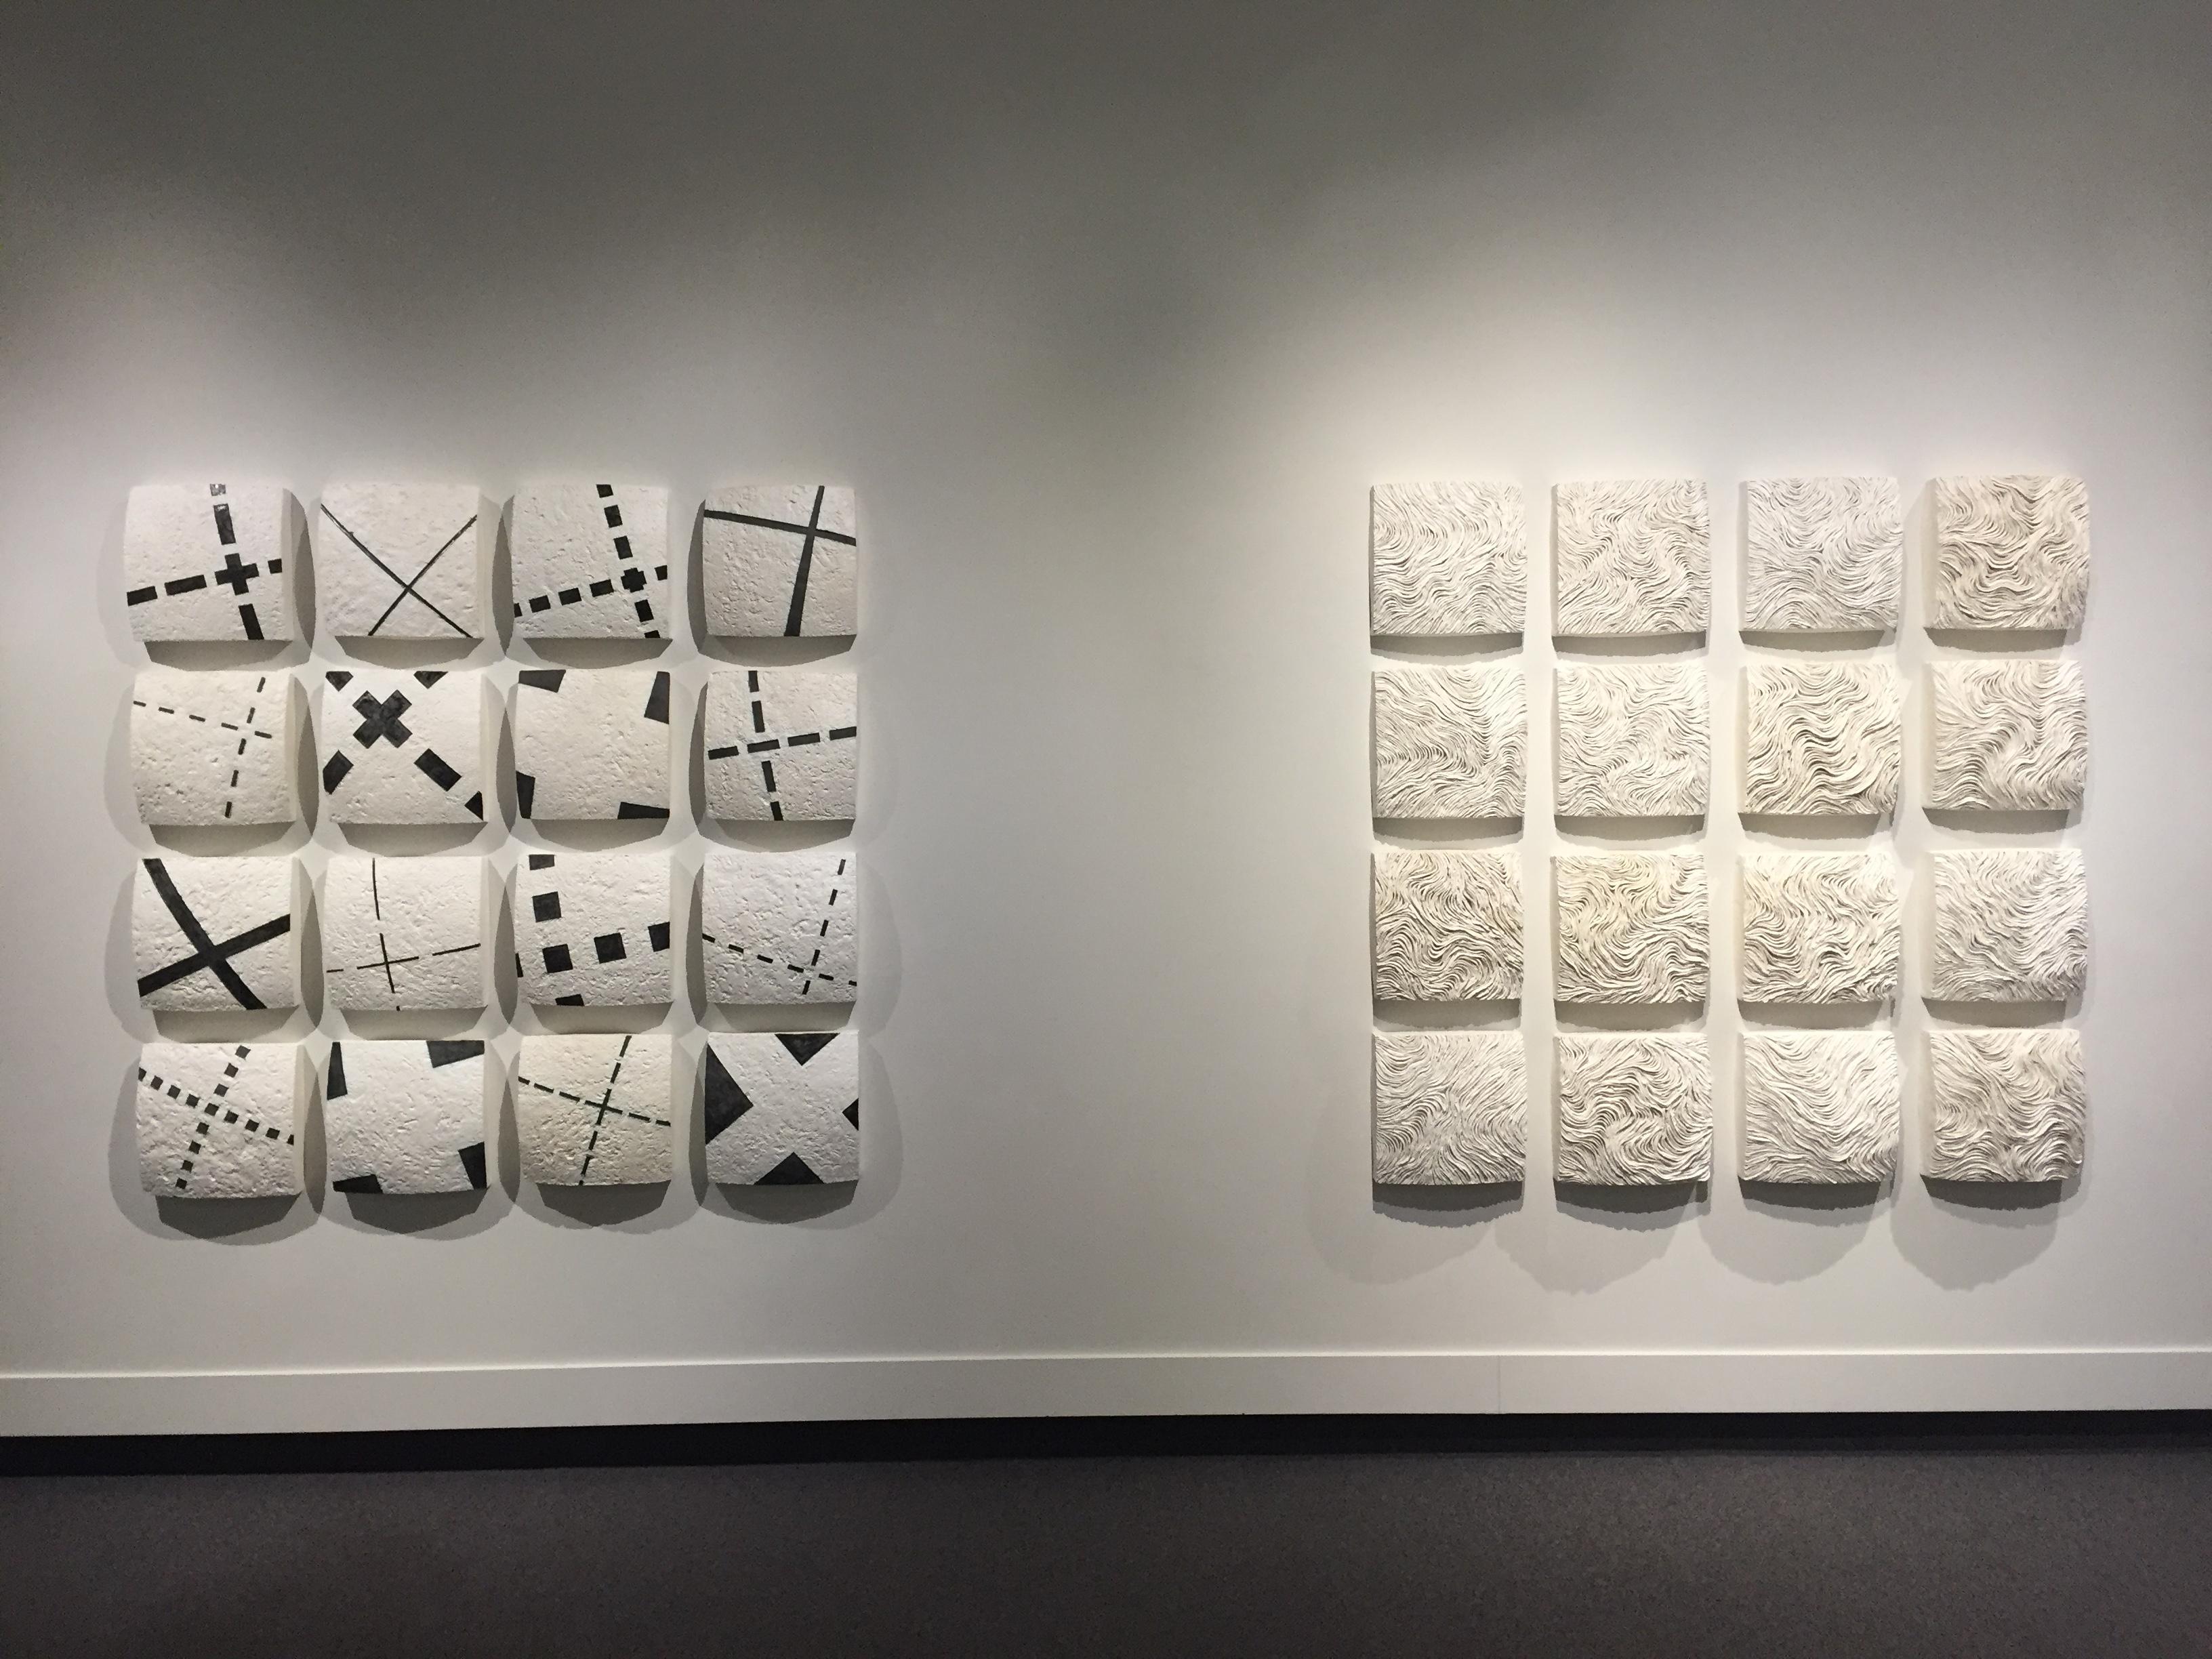 As a self-proclaimed topophiliac, Gregor Turk is known for ceramic sculptures, photography, mixed-media constructions and various public art installations, with the most recent at the Metropolitan Library in Atlanta, Georgia. Turk focuses on the